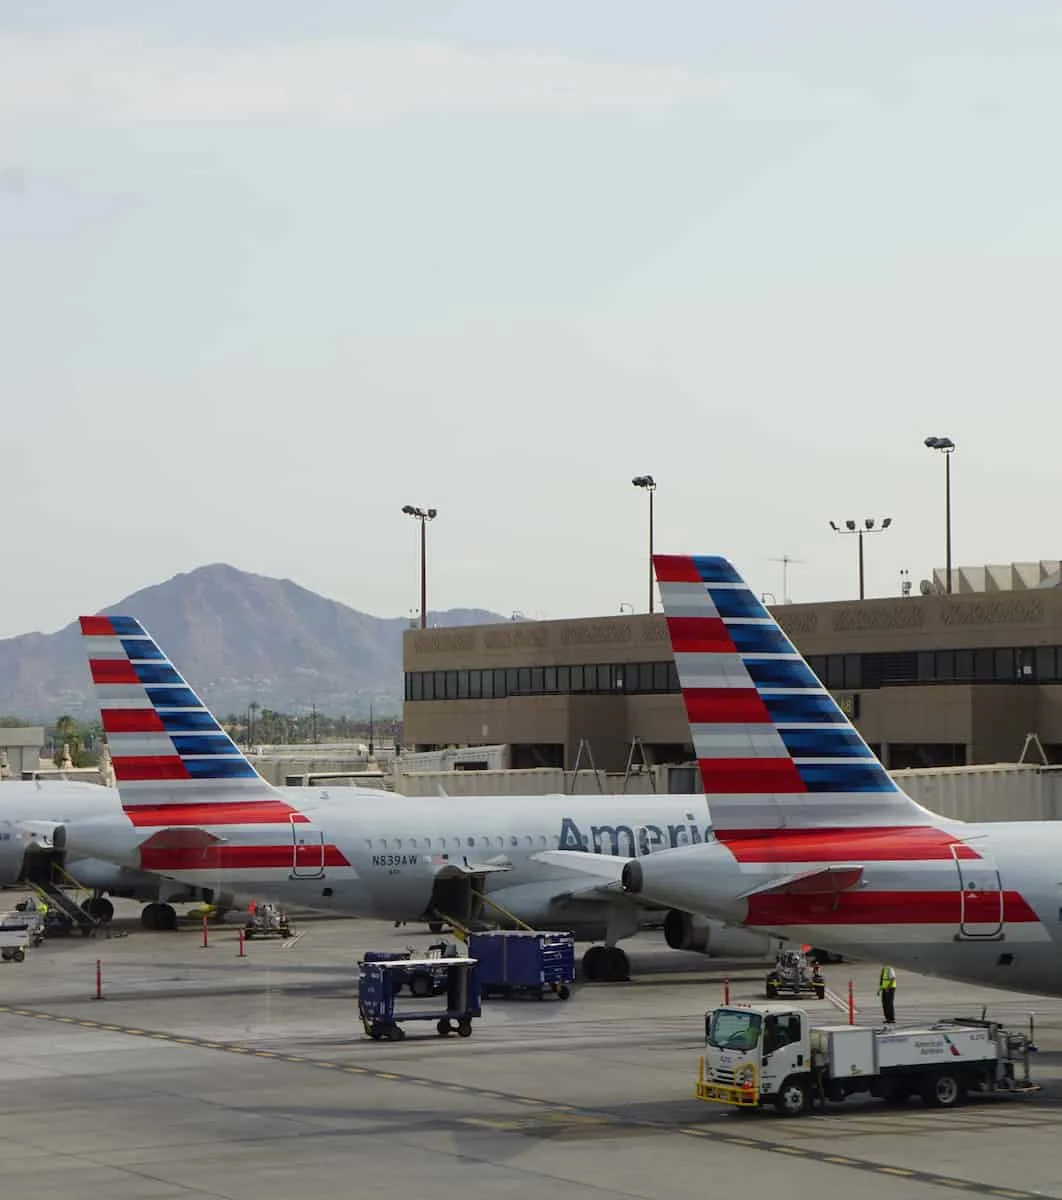 I used 7,500 American Airlines miles to fly to Phoenix to visit Arizona in the summer.